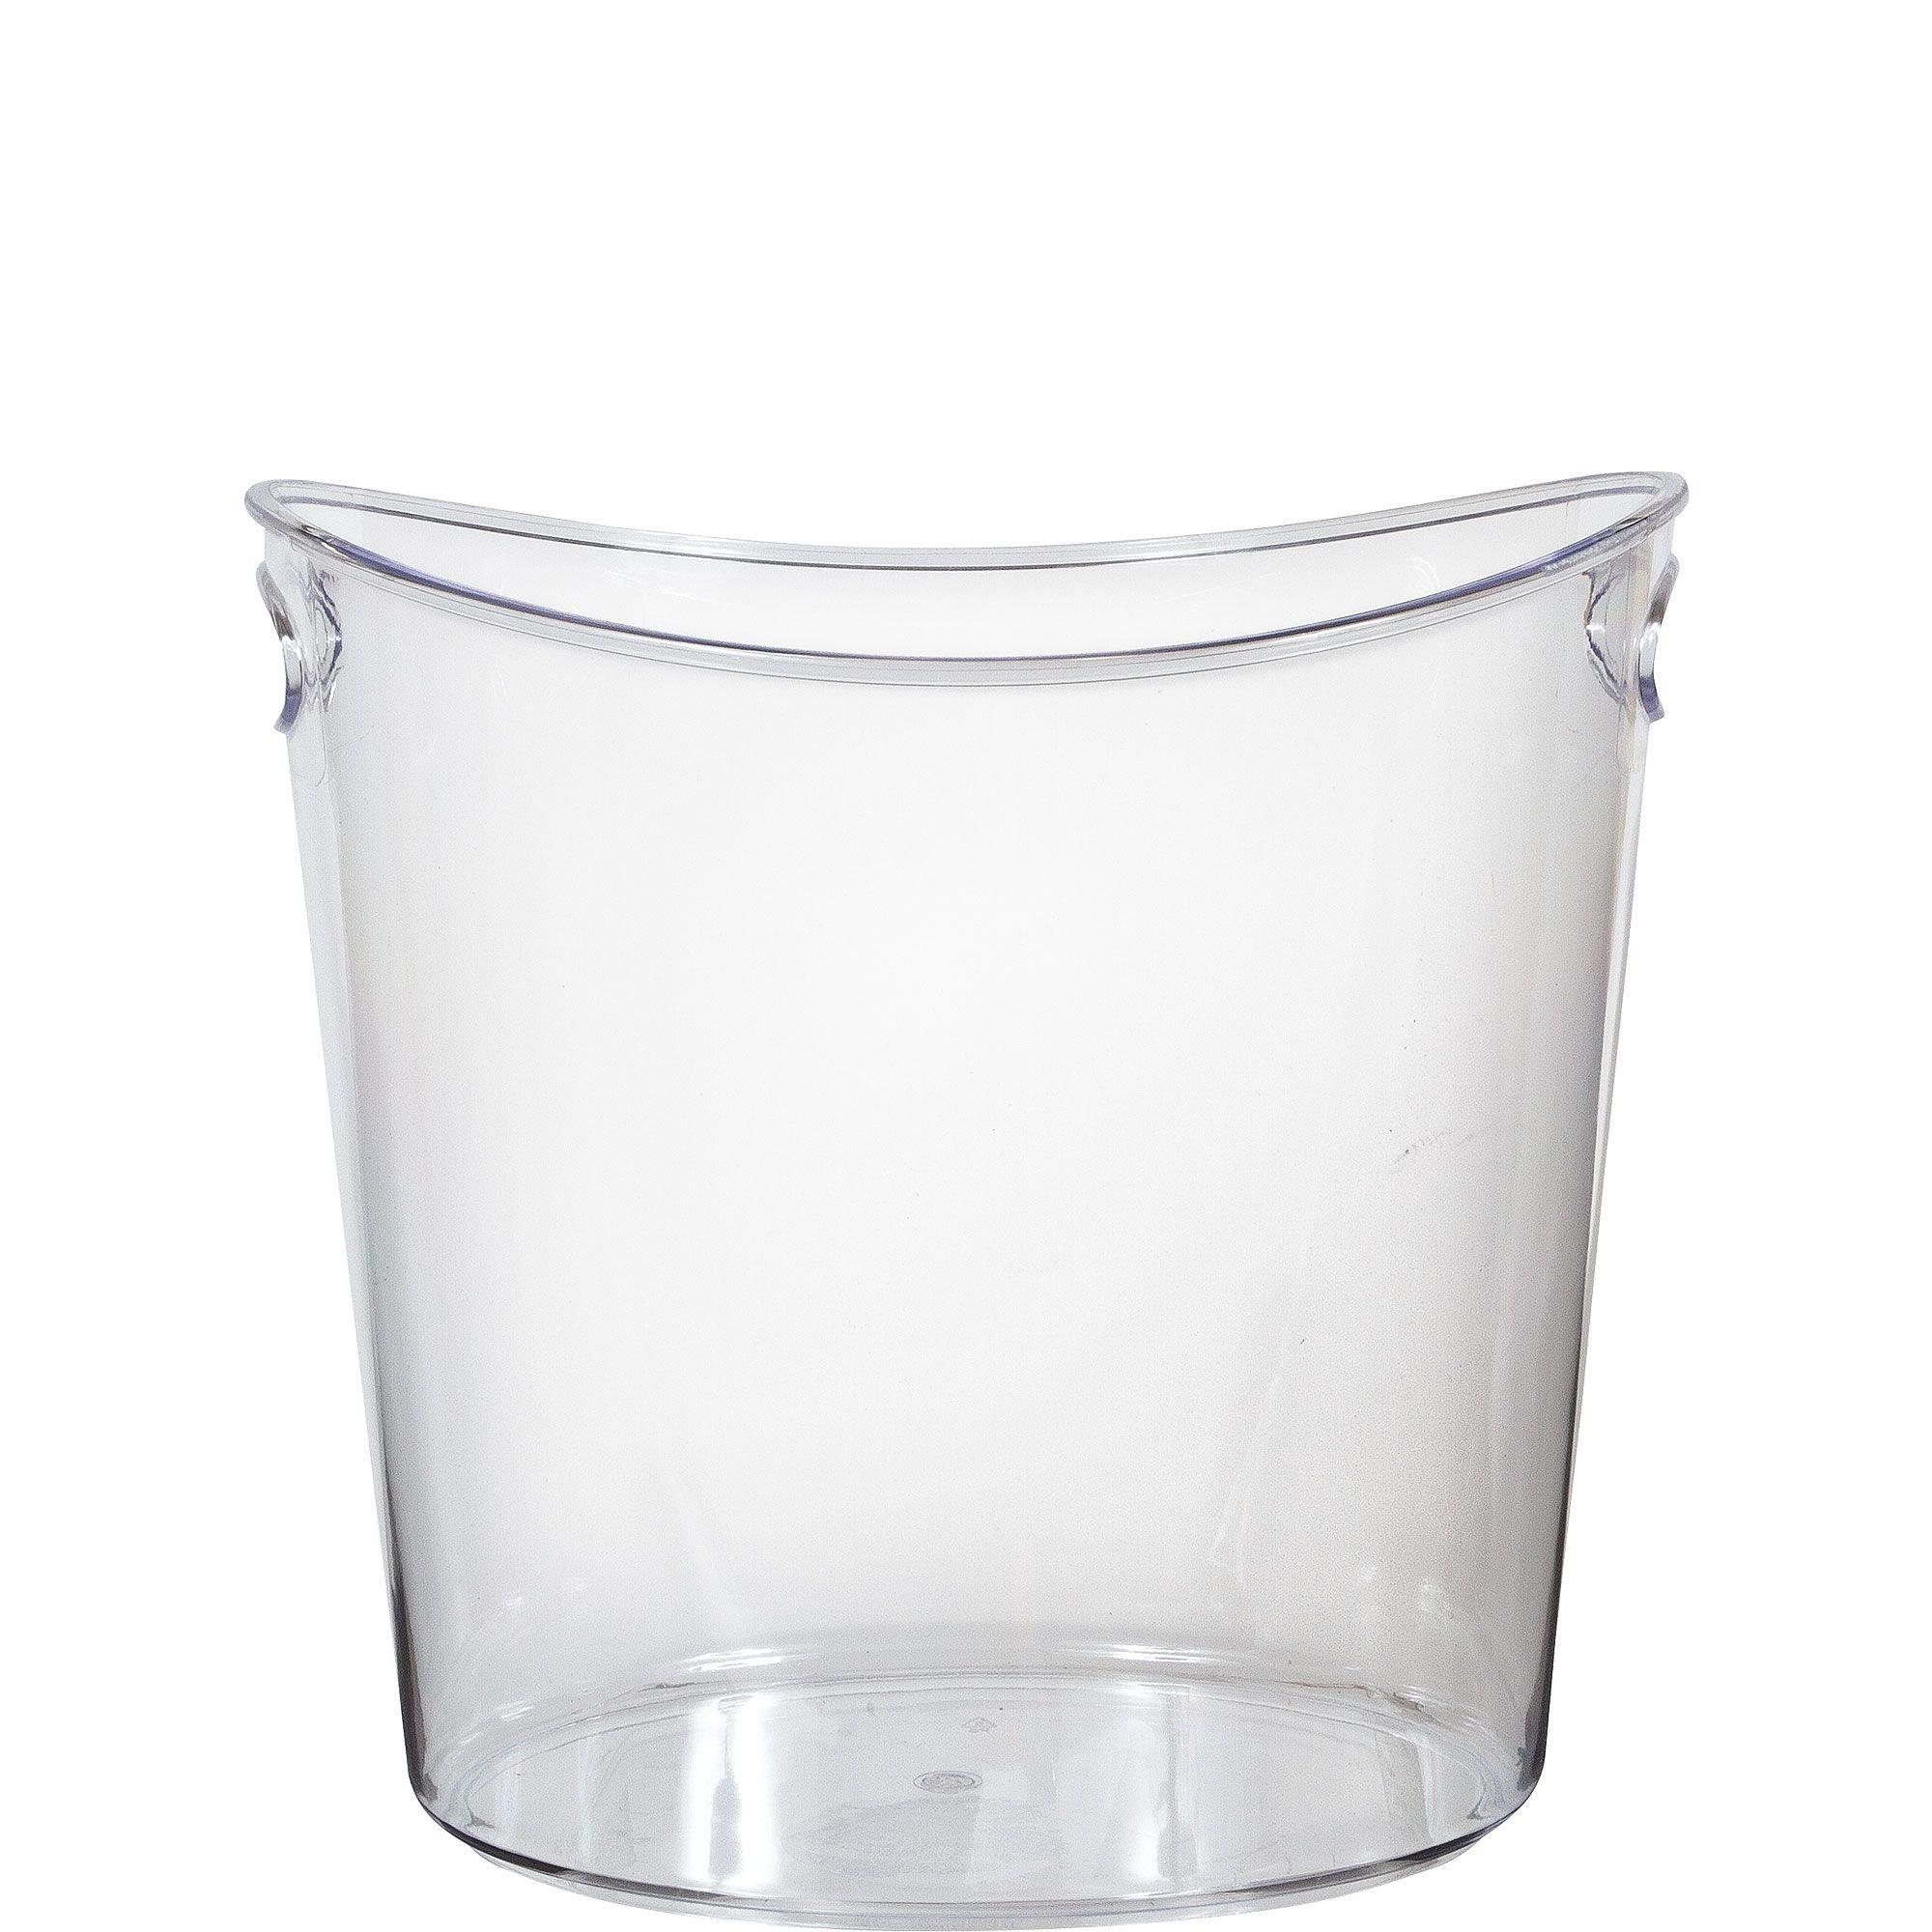 Clear Plastic Scoops, 2-ct. Packs